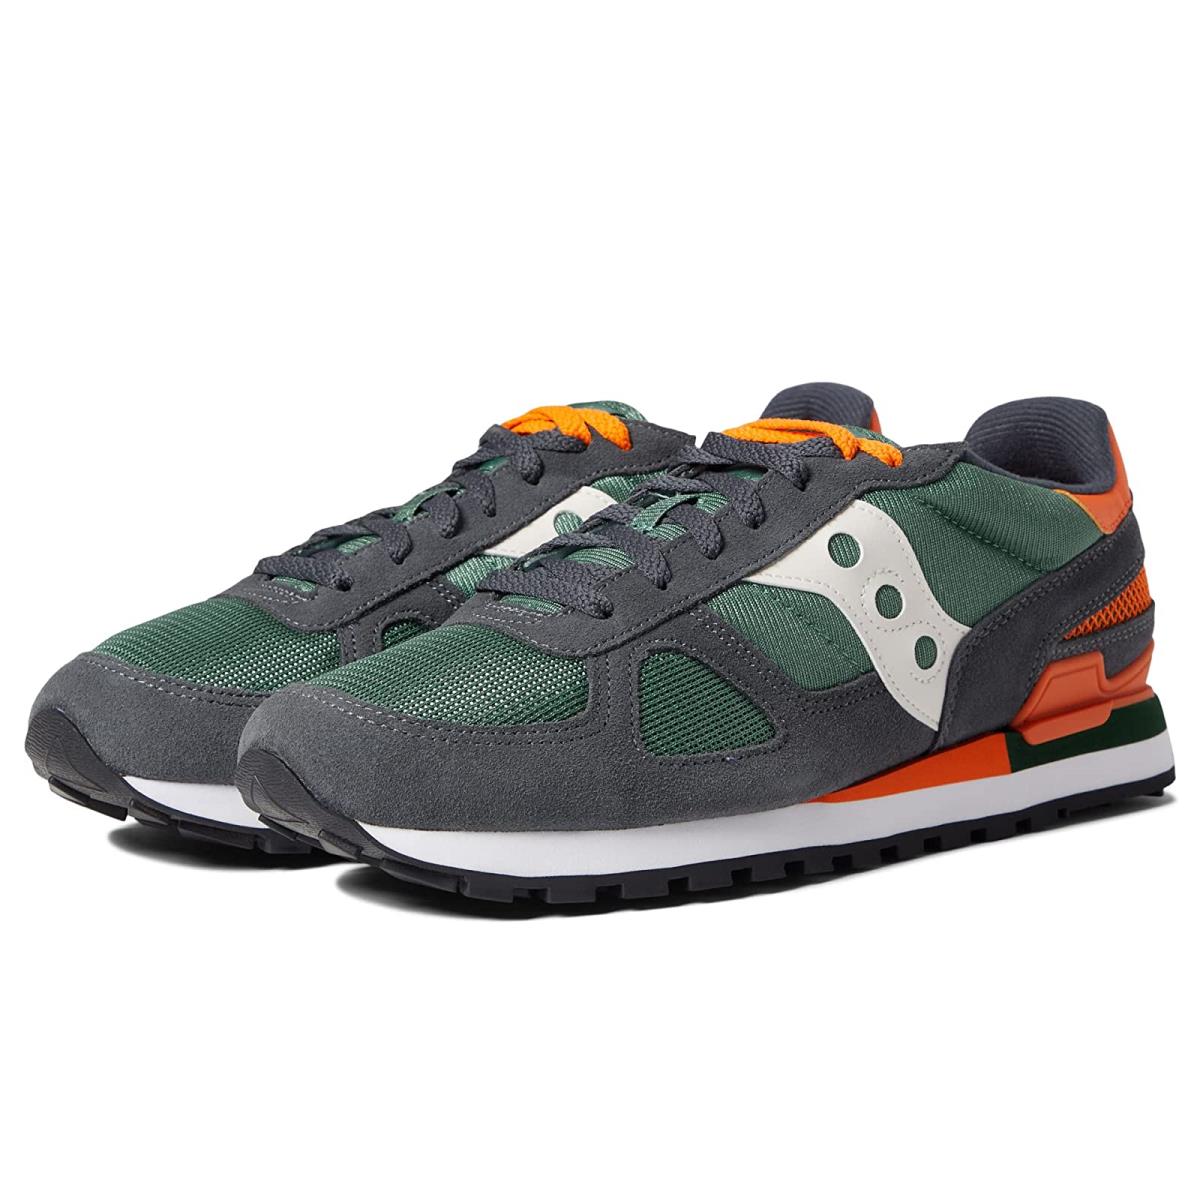 Unisex Sneakers Athletic Shoes Saucony s Shadow Dark Grey/Green